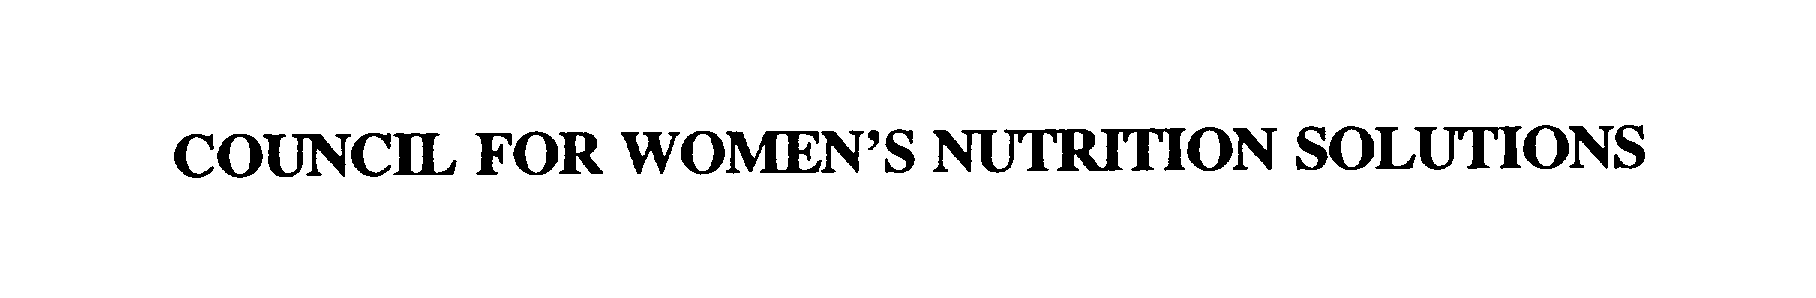 COUNCIL FOR WOMEN'S NUTRITION SOLUTIONS